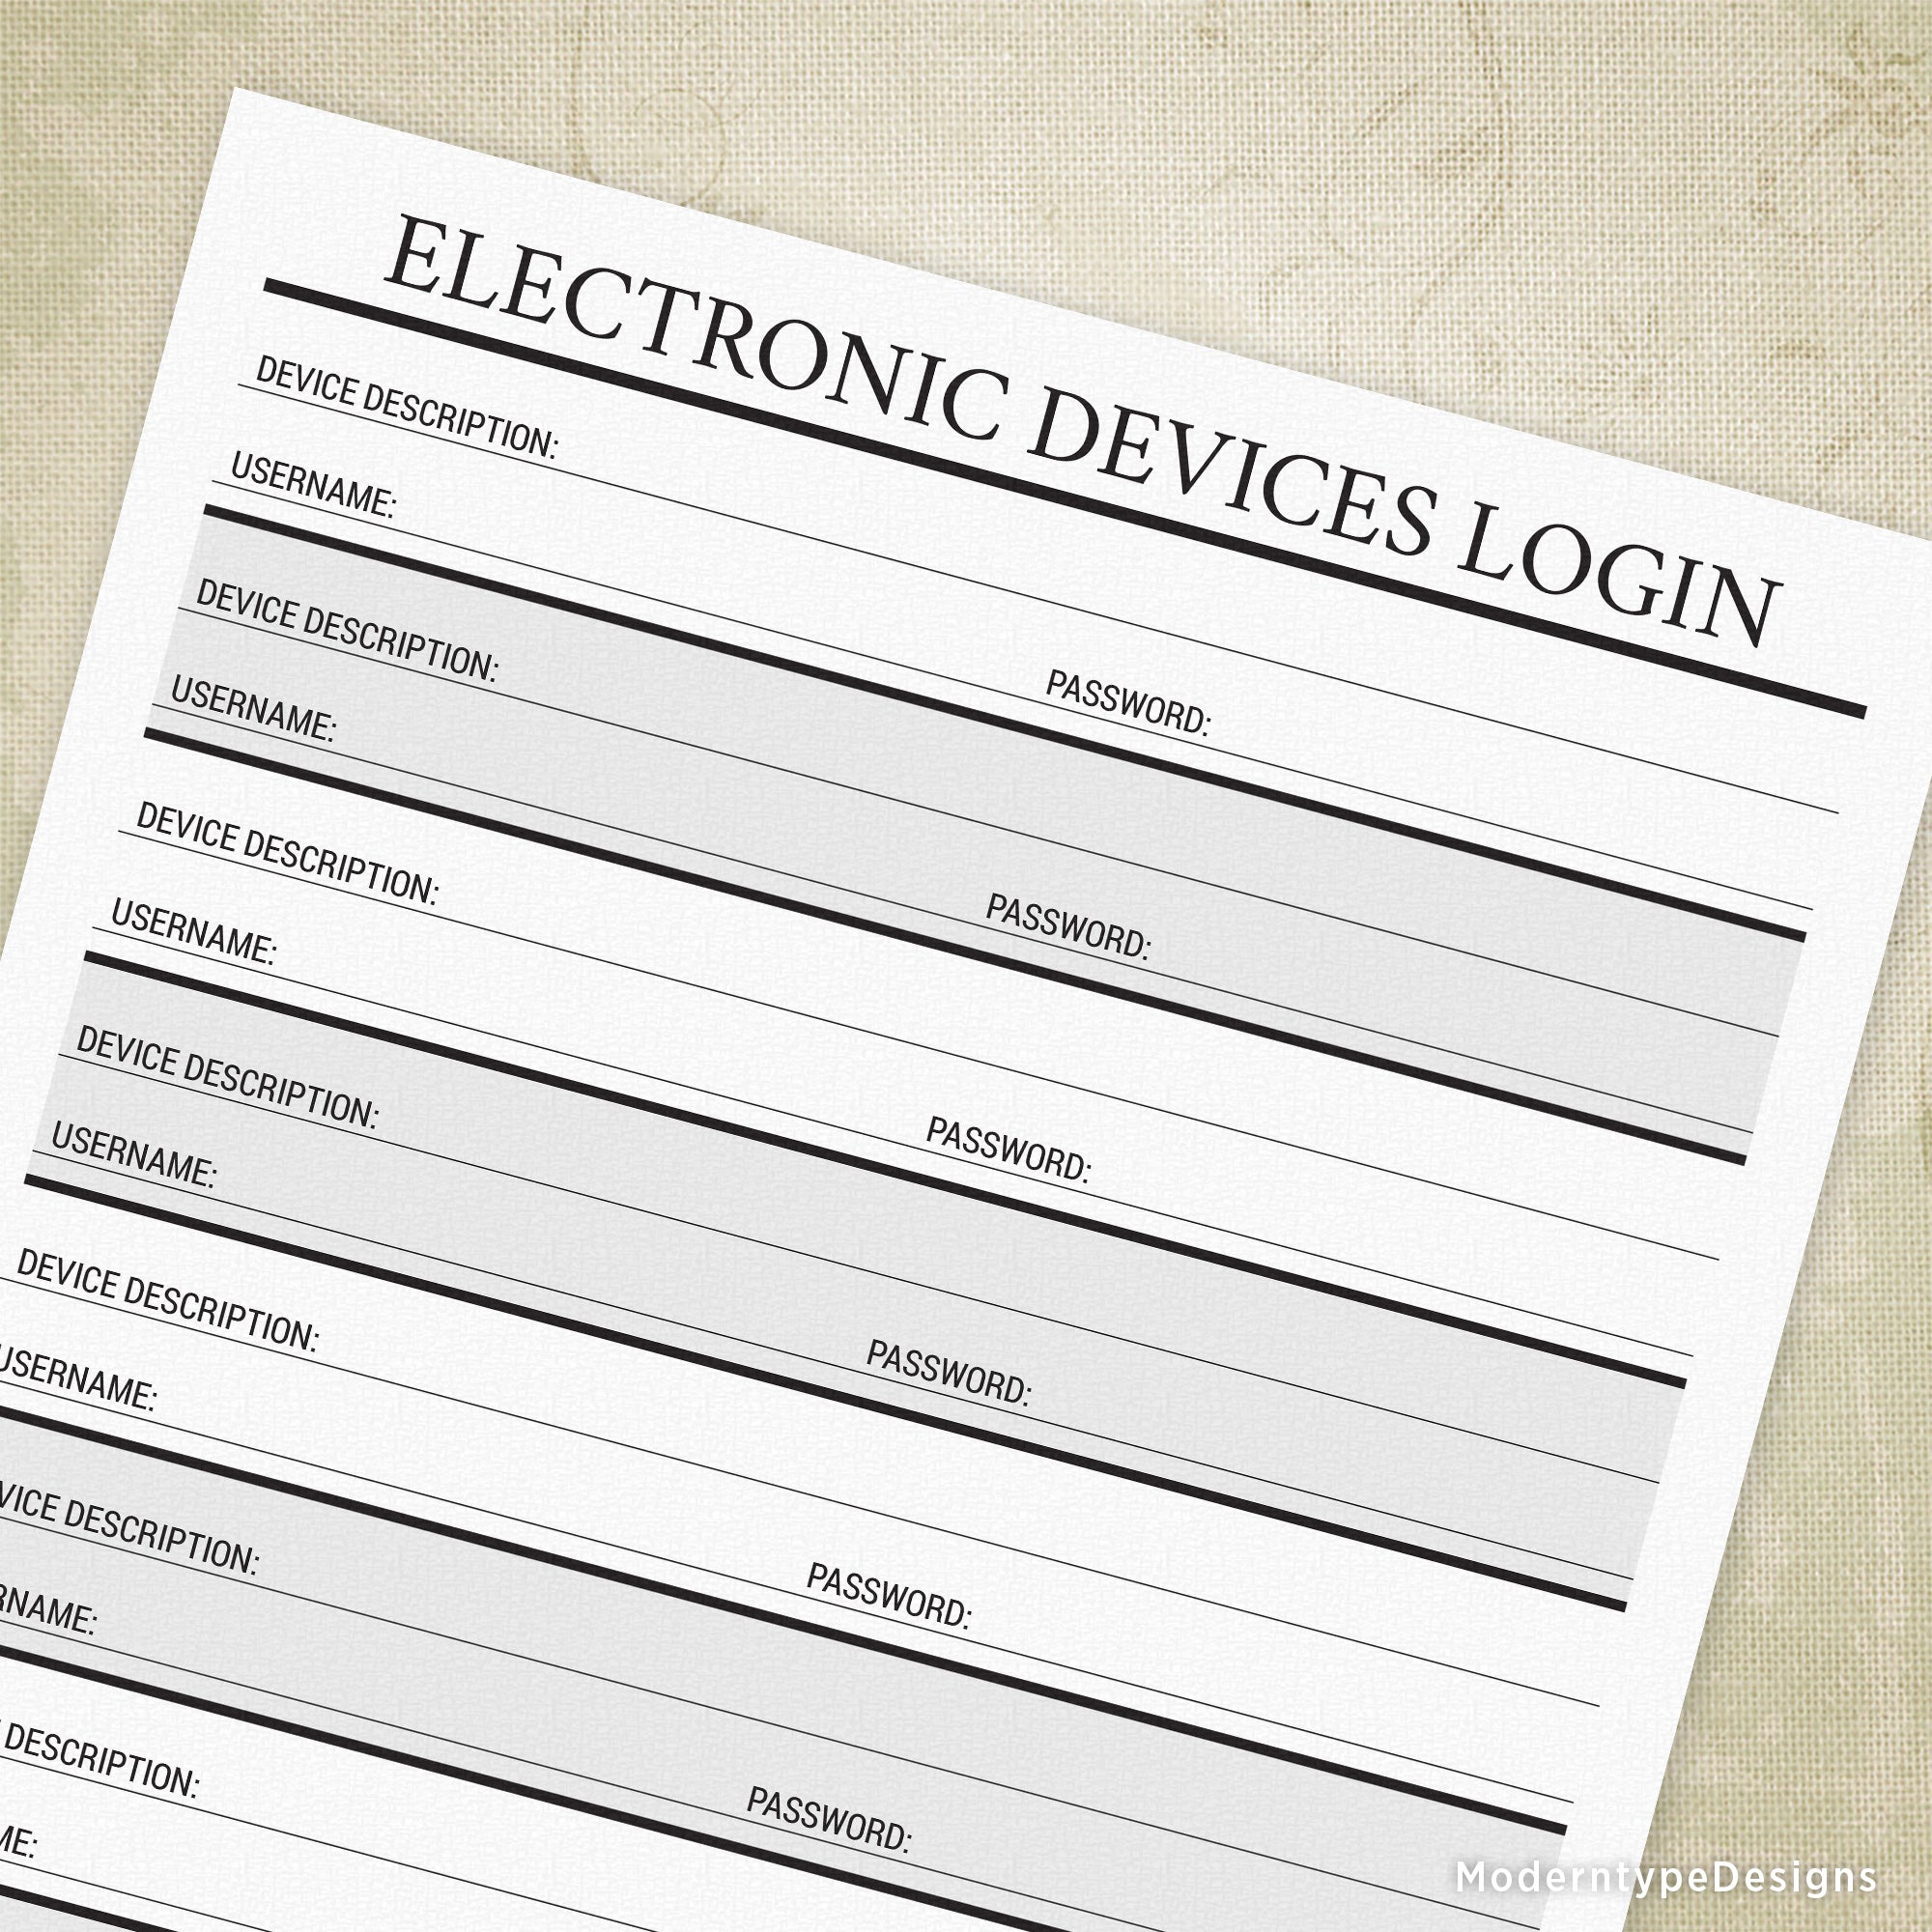 Electronic Devices Login Printable - End of Life